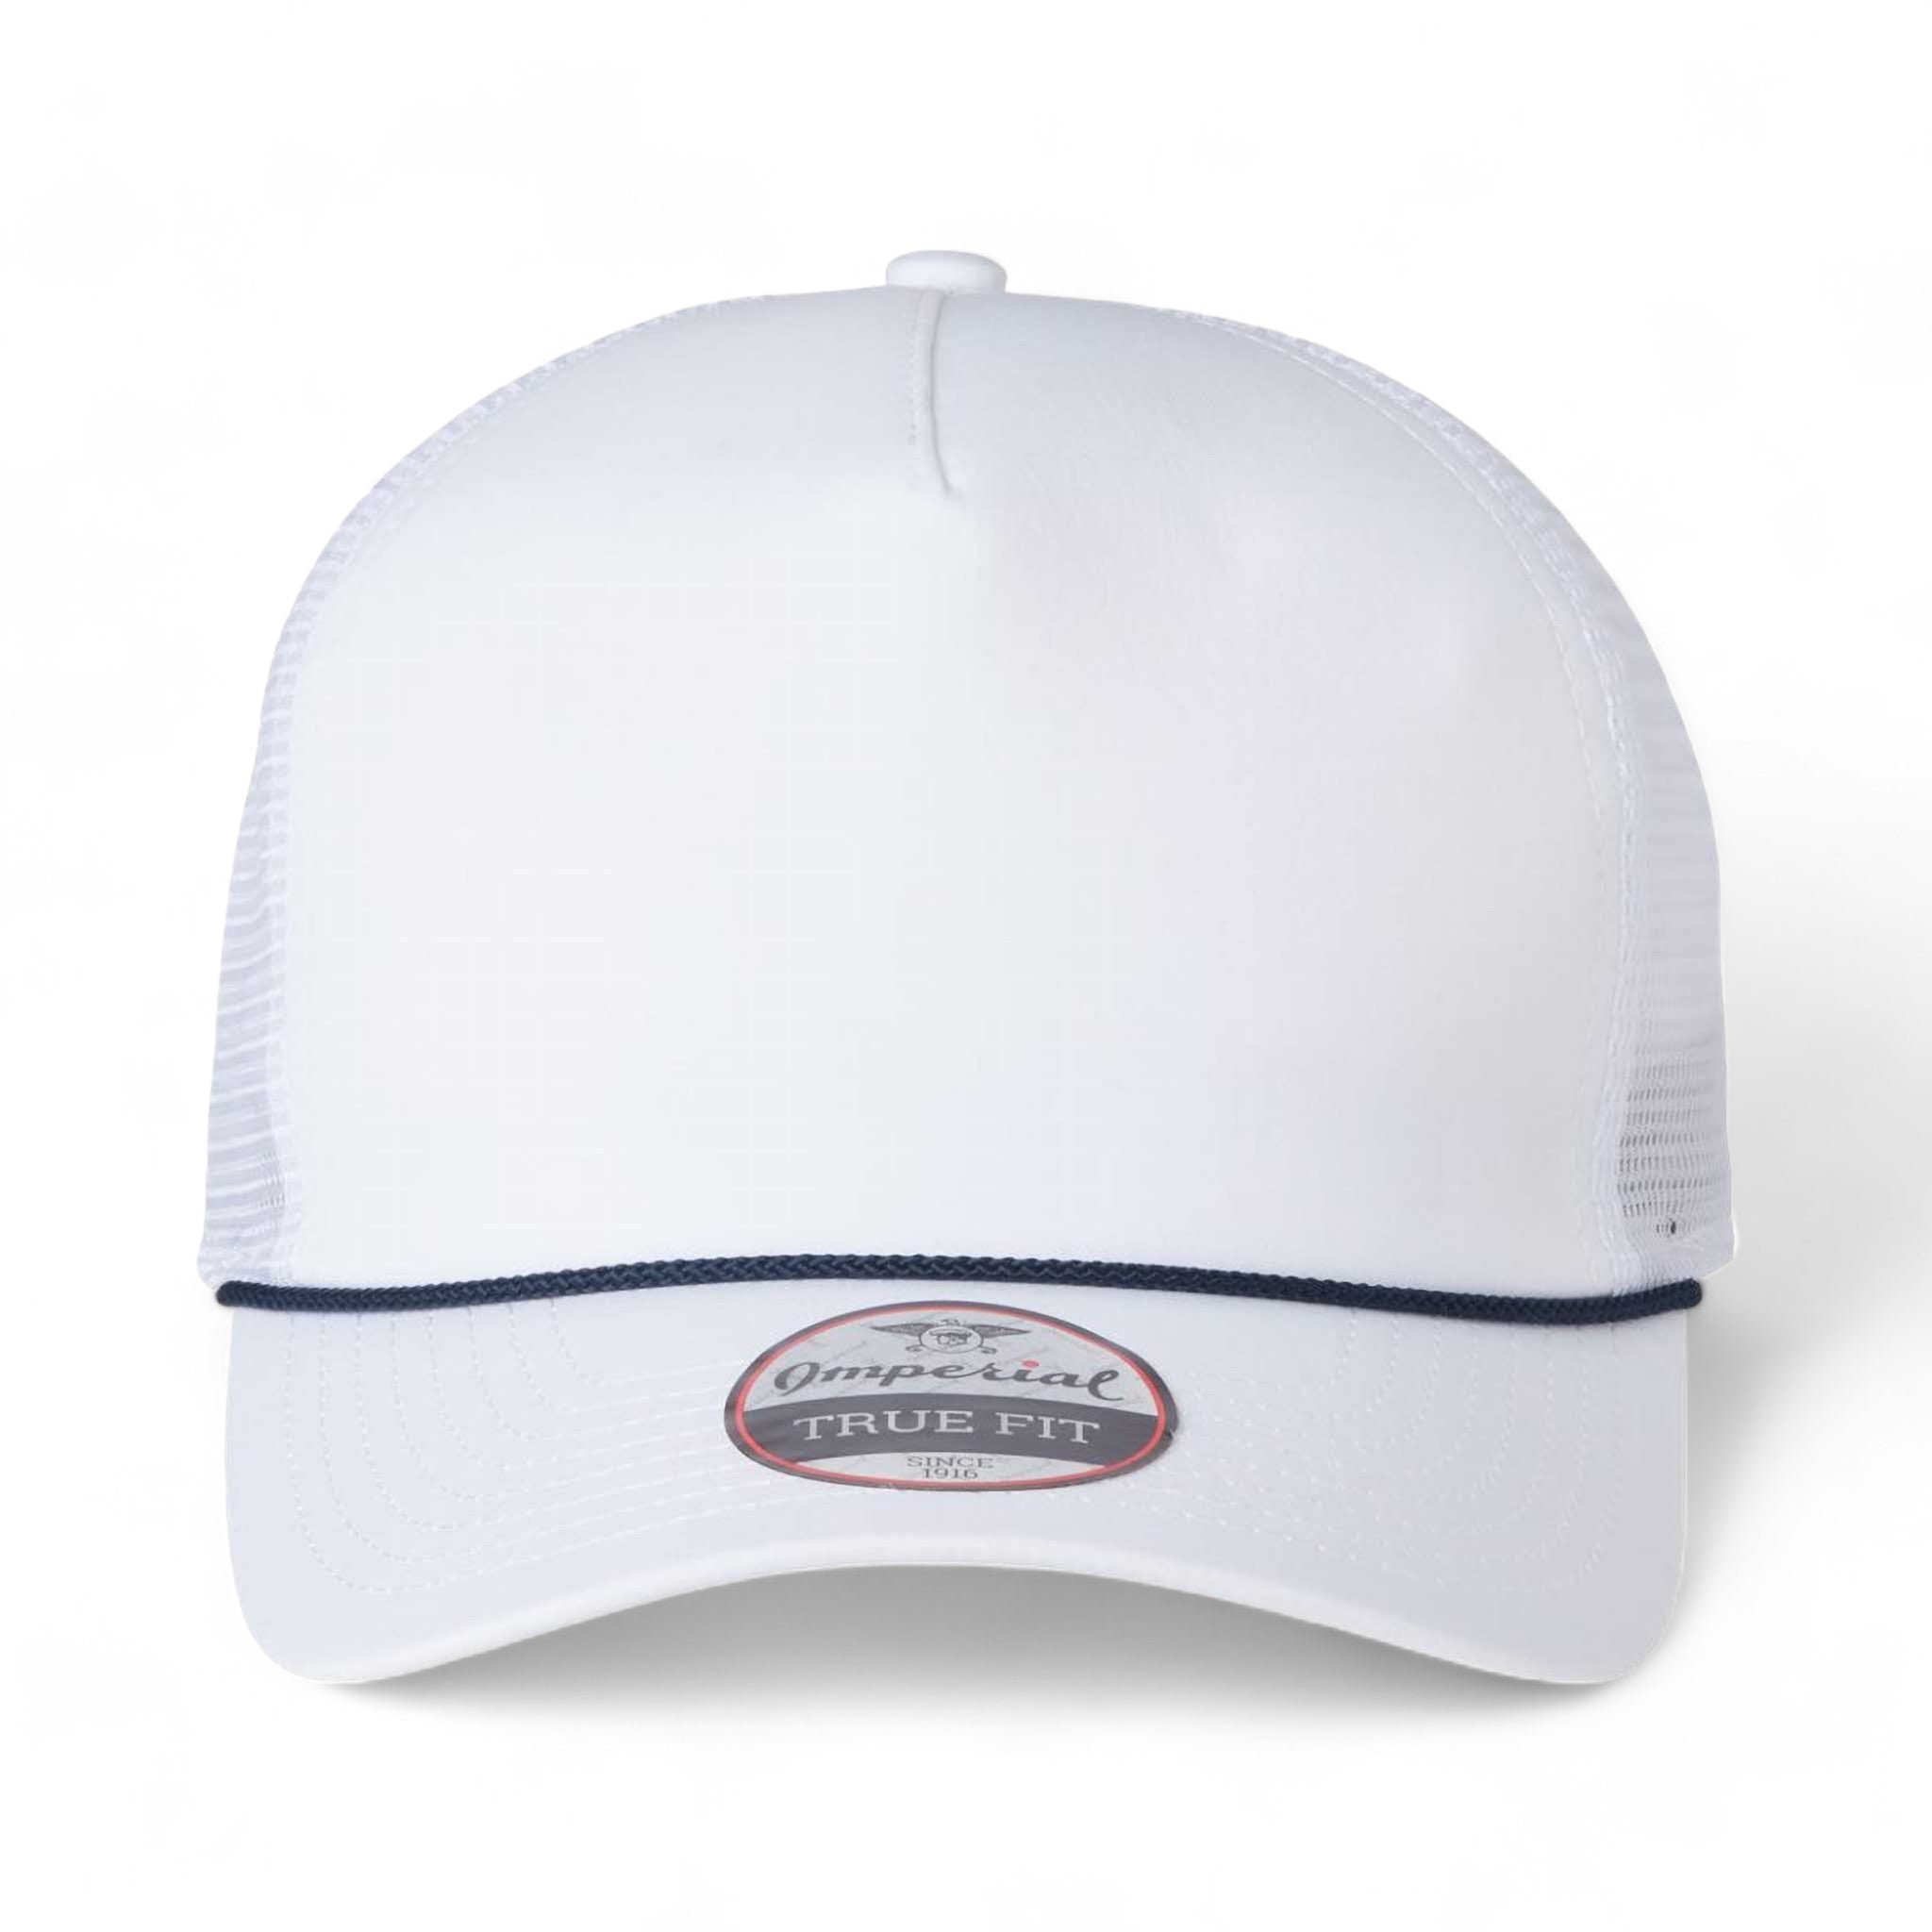 Front view of Imperial 5055 custom hat in white, white and navy